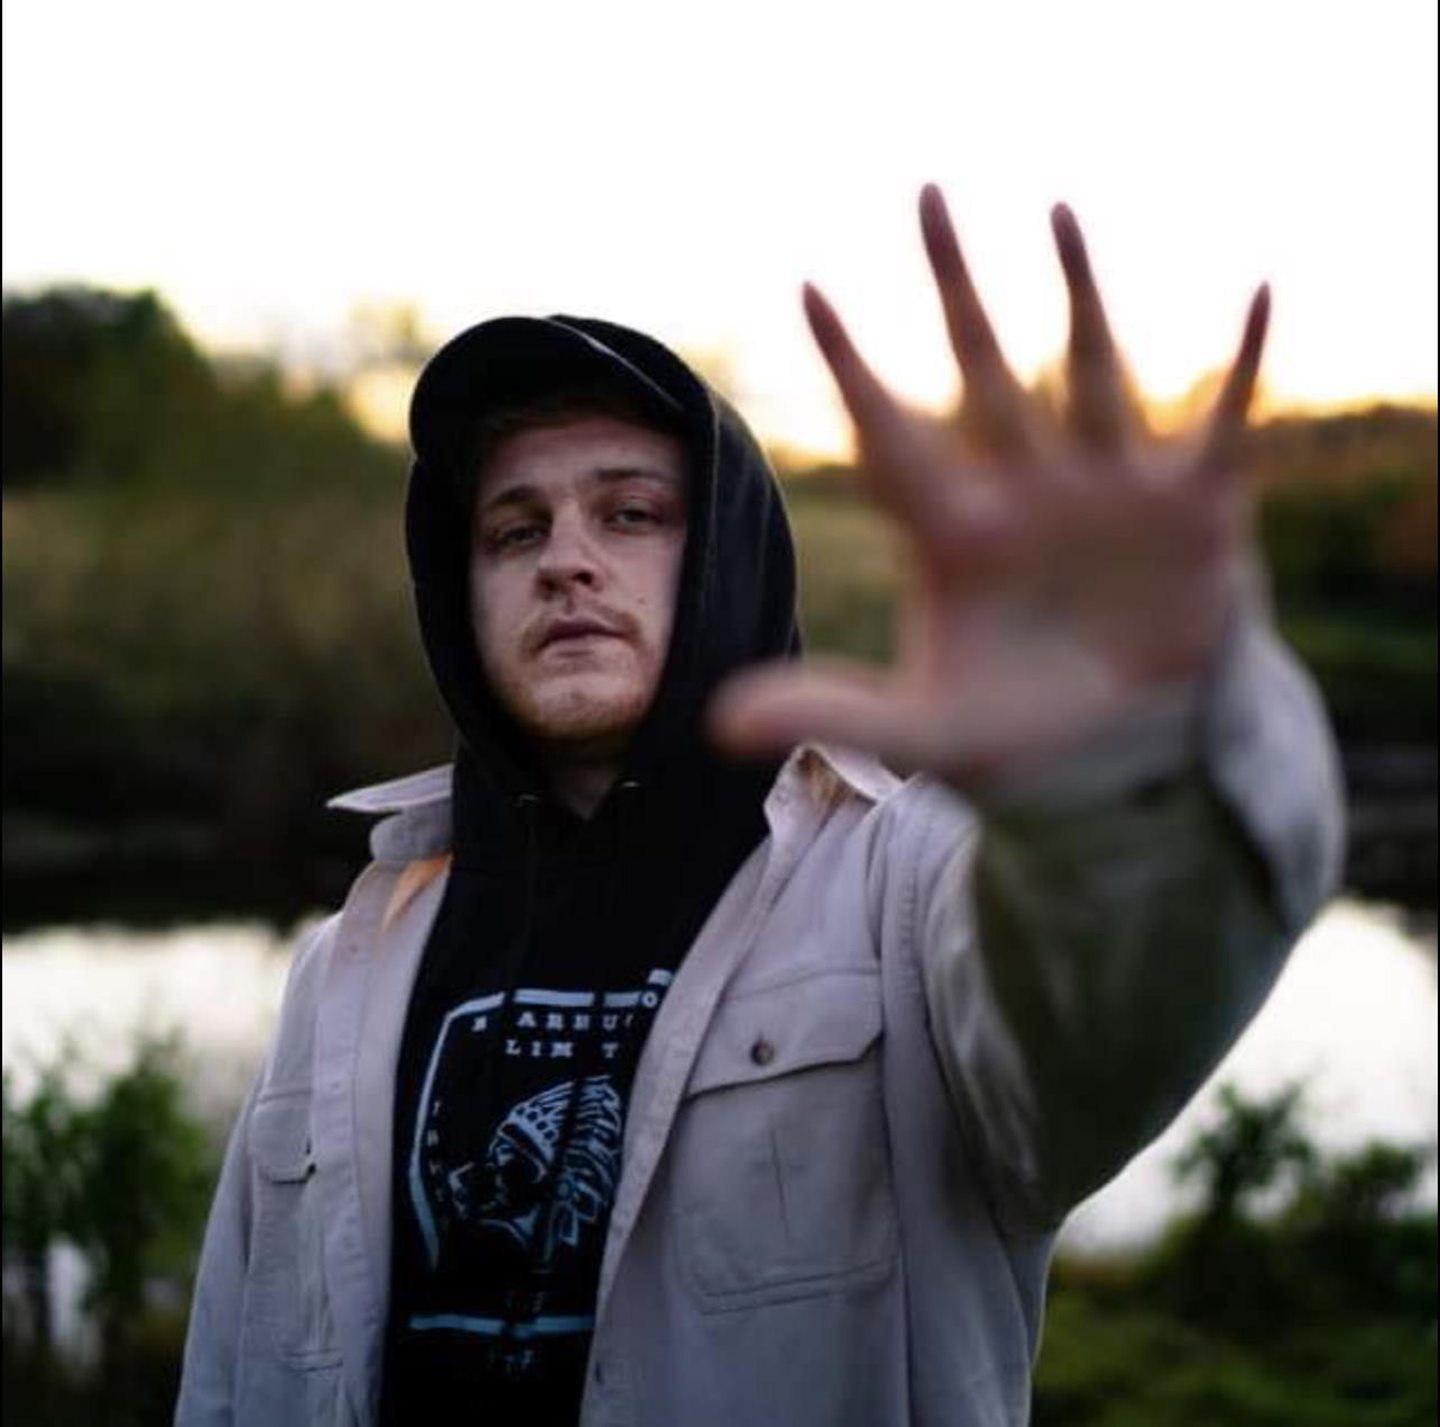 Aberdeen rapper CRPNTR will perform at the HOURS ABDN event. Image supplied by HOURS ABDN